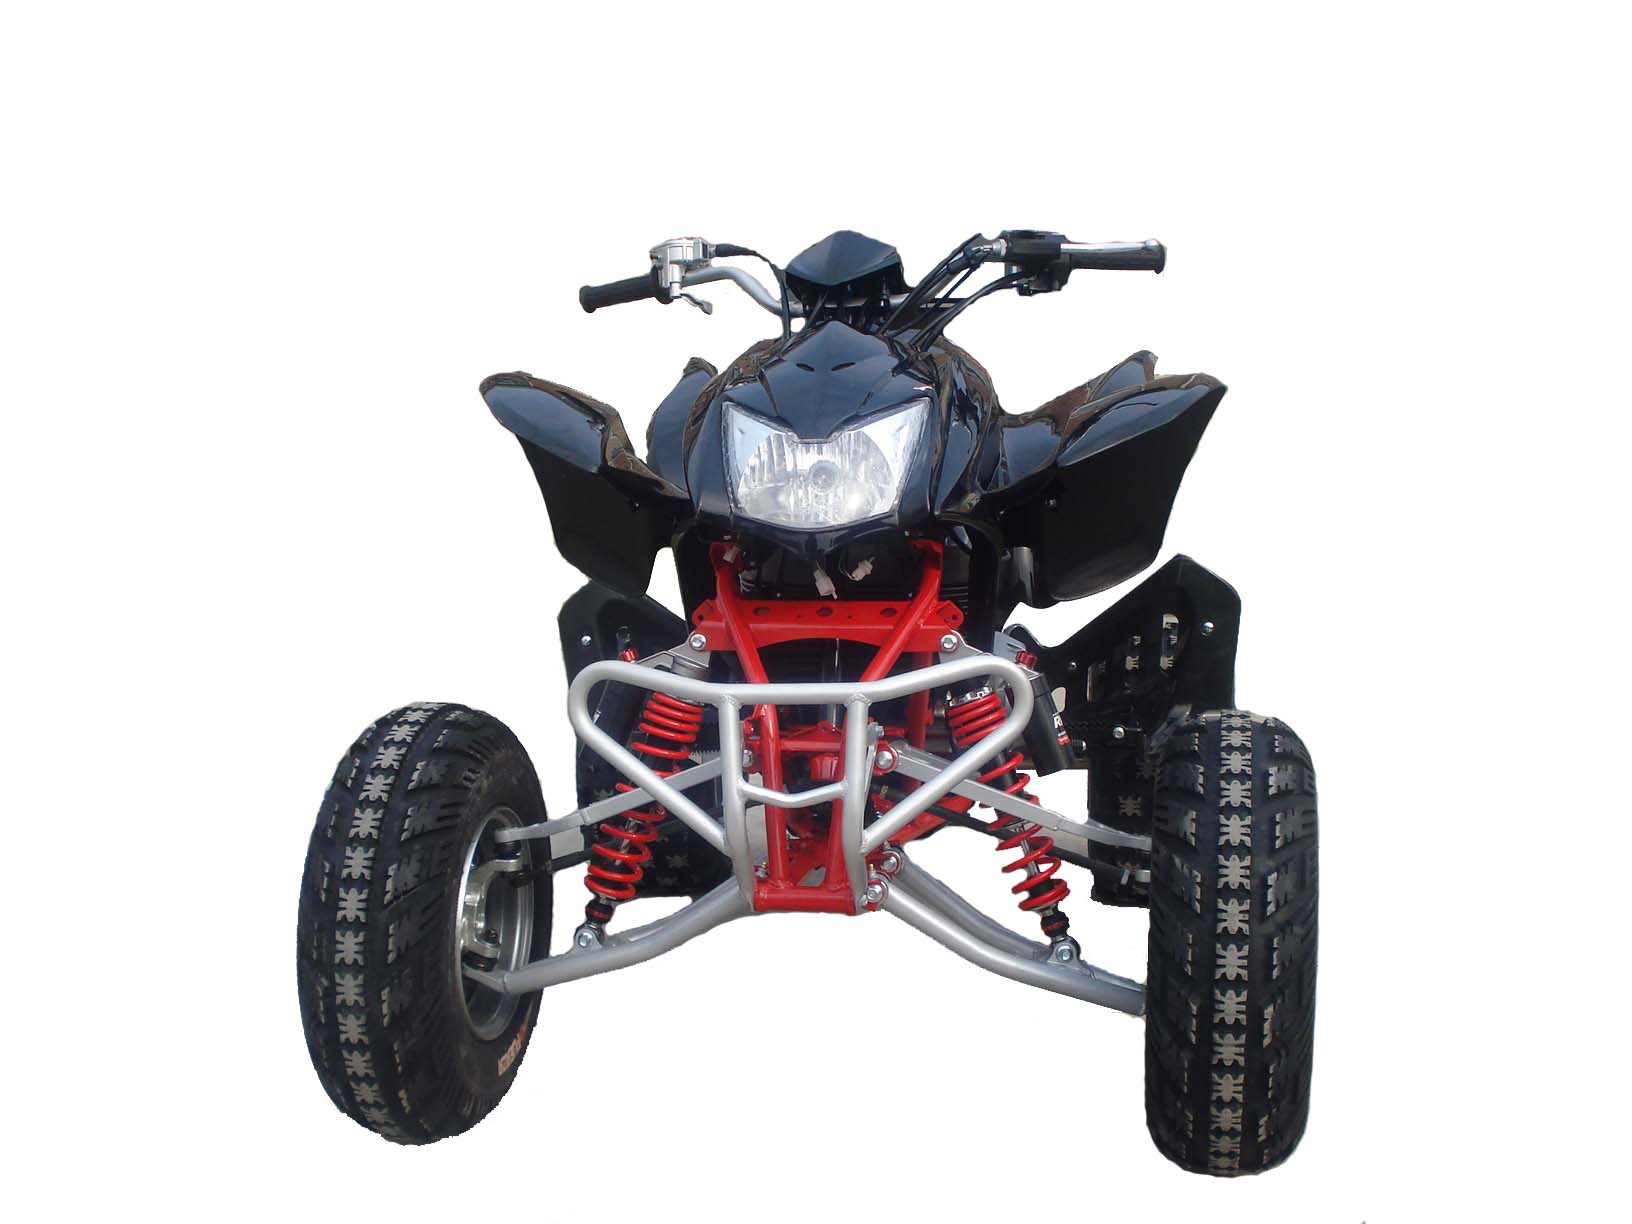 400cc Sports ATV with high torque engine and reverse gear